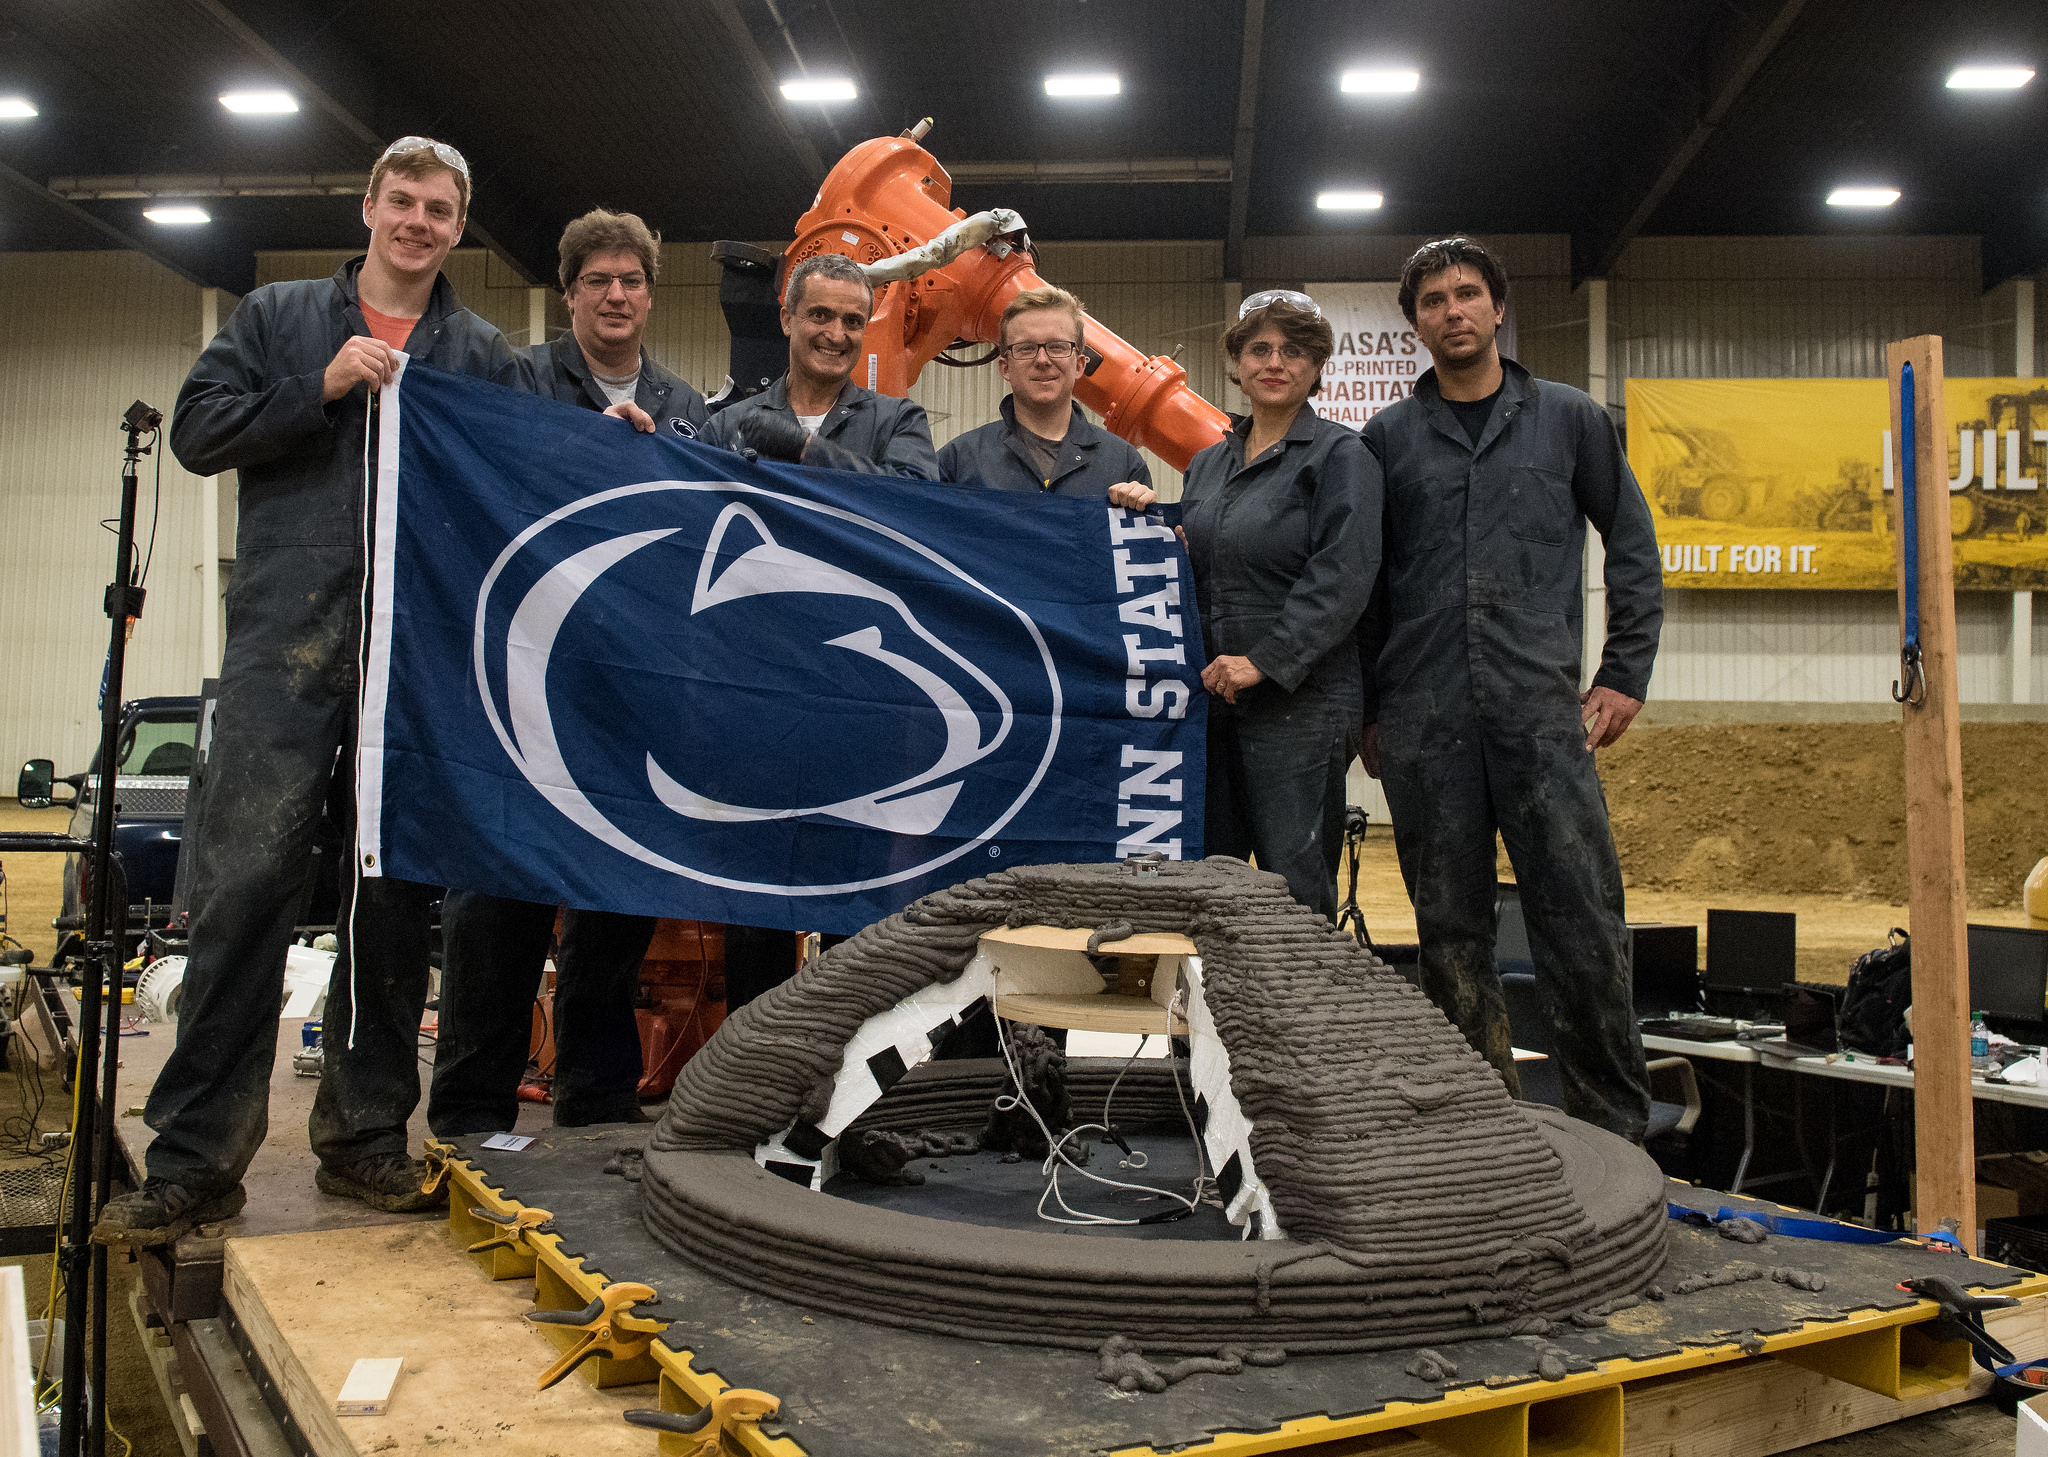 Members of the Penn State Den@Mars team, from University Park, Pa., with their completed 3D-printed dome structure.